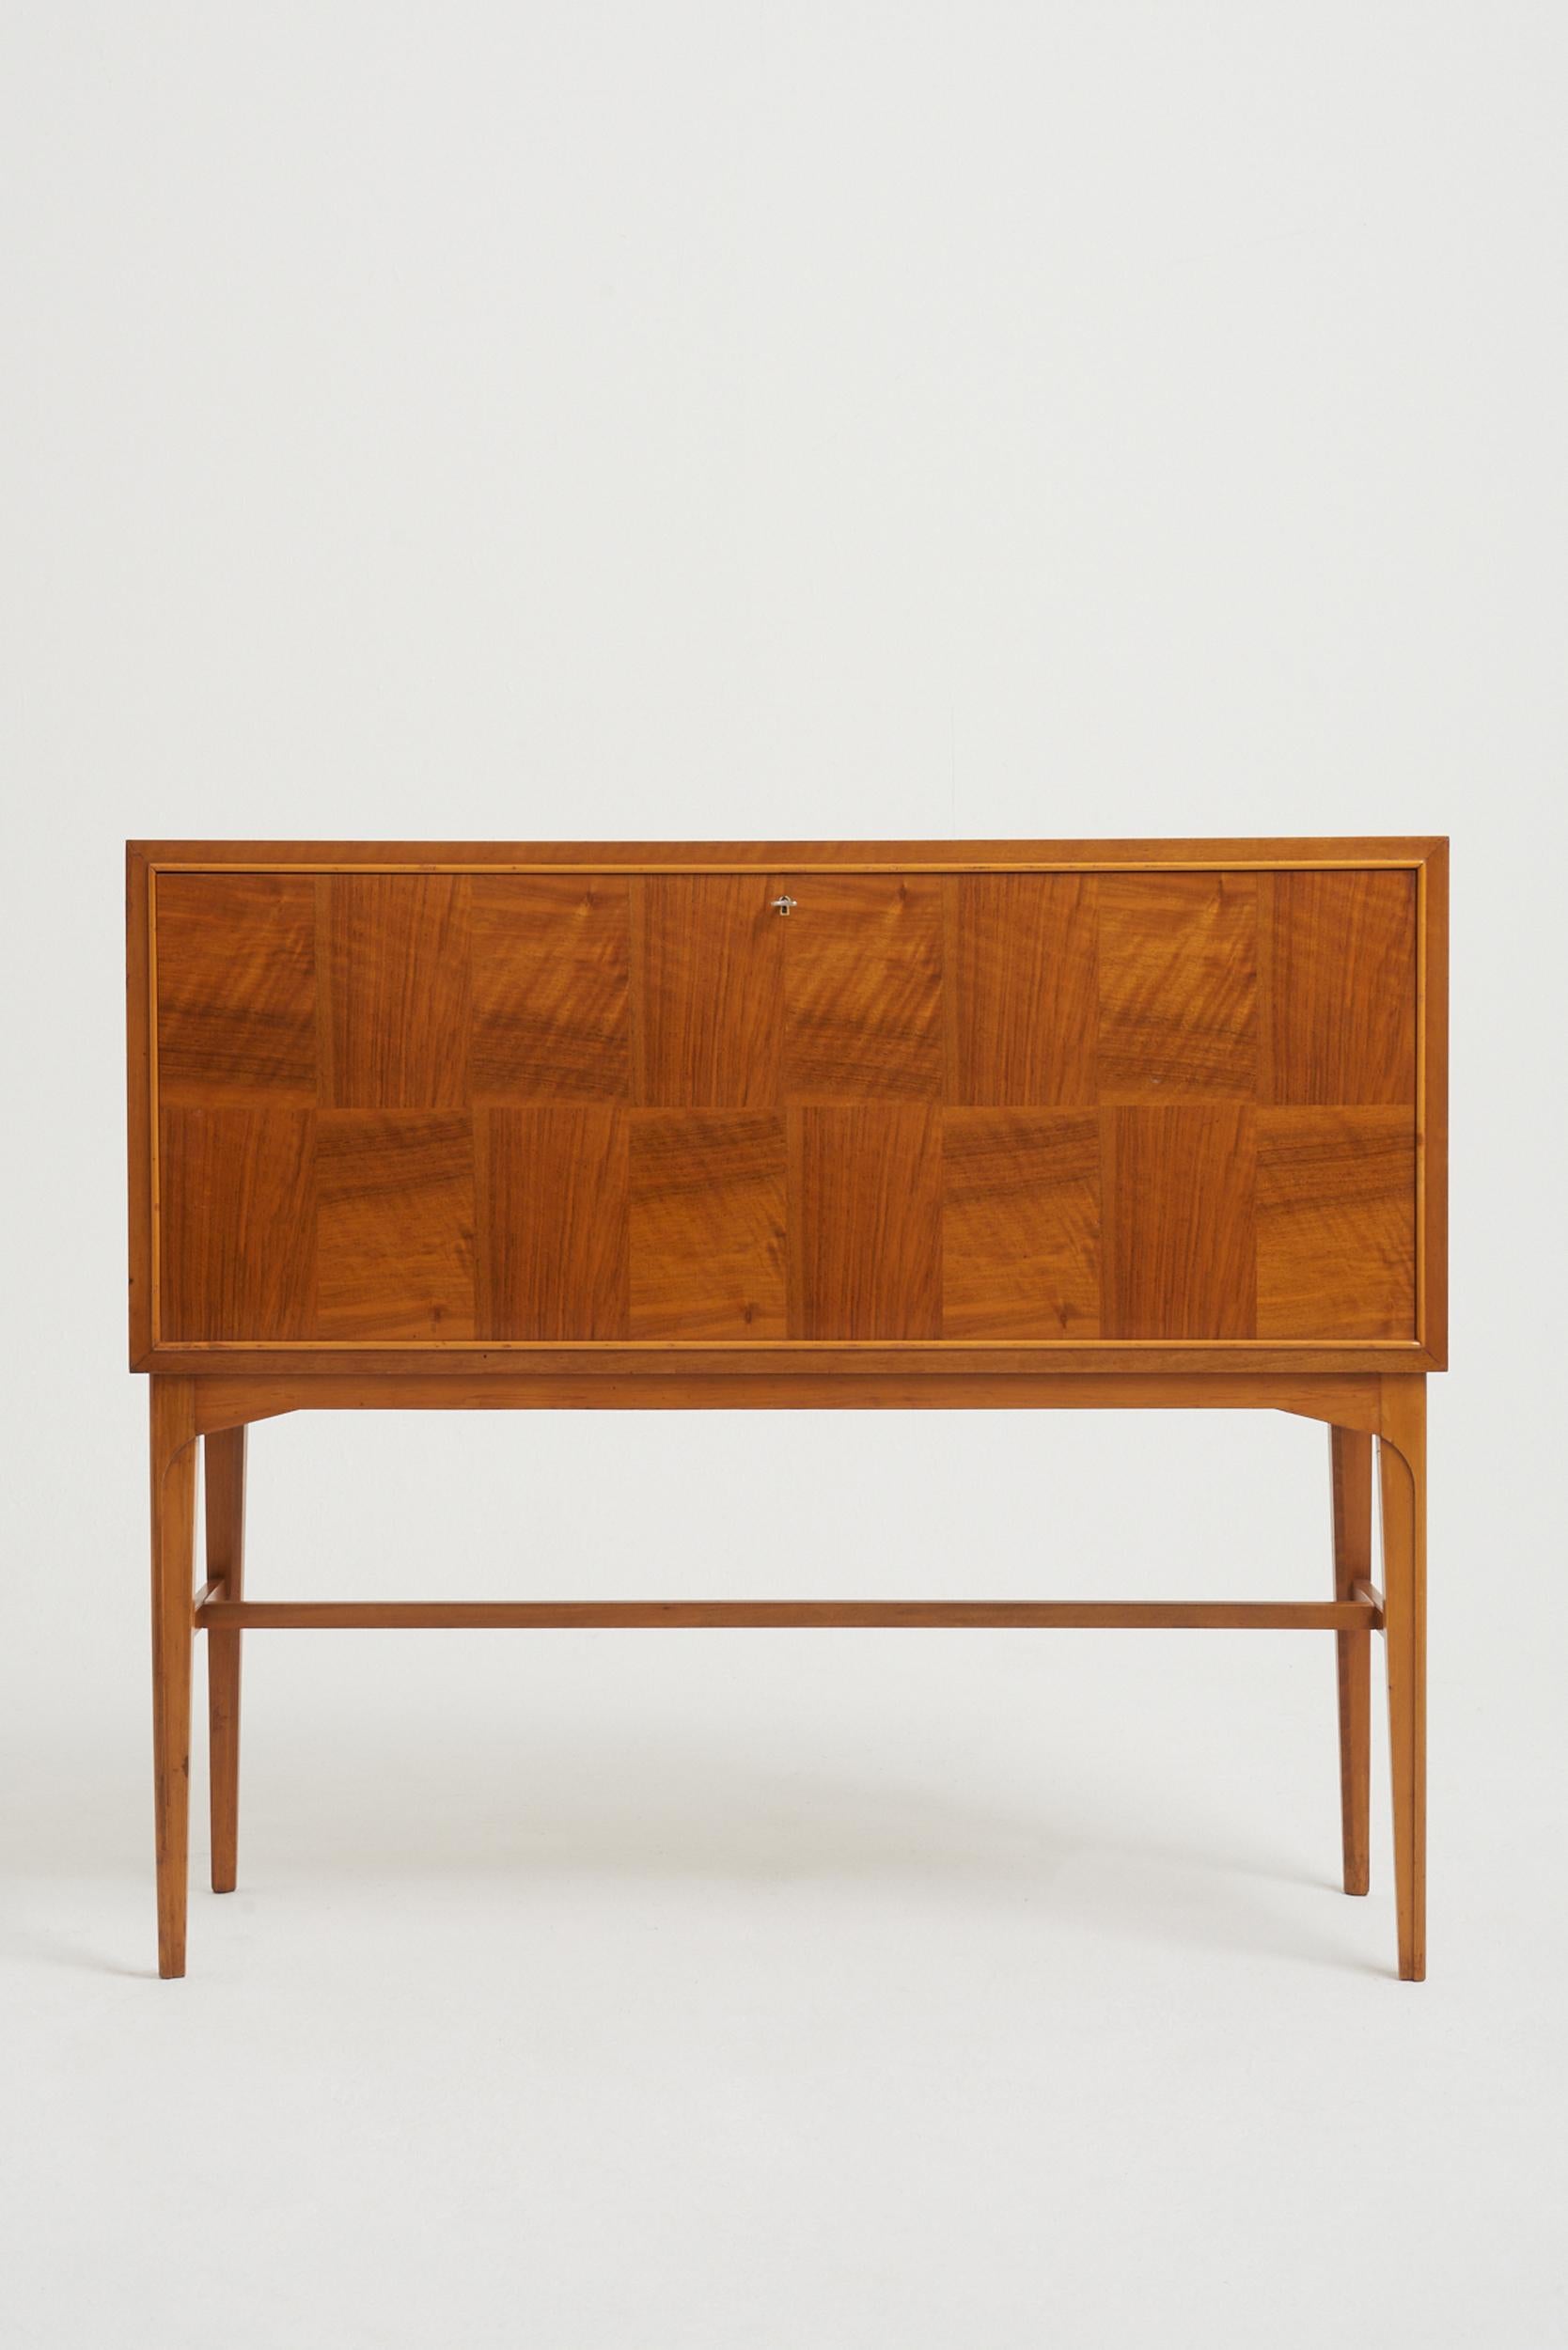 Swedish Midcentury Drinks Cabinet by Carl-Axel Acking